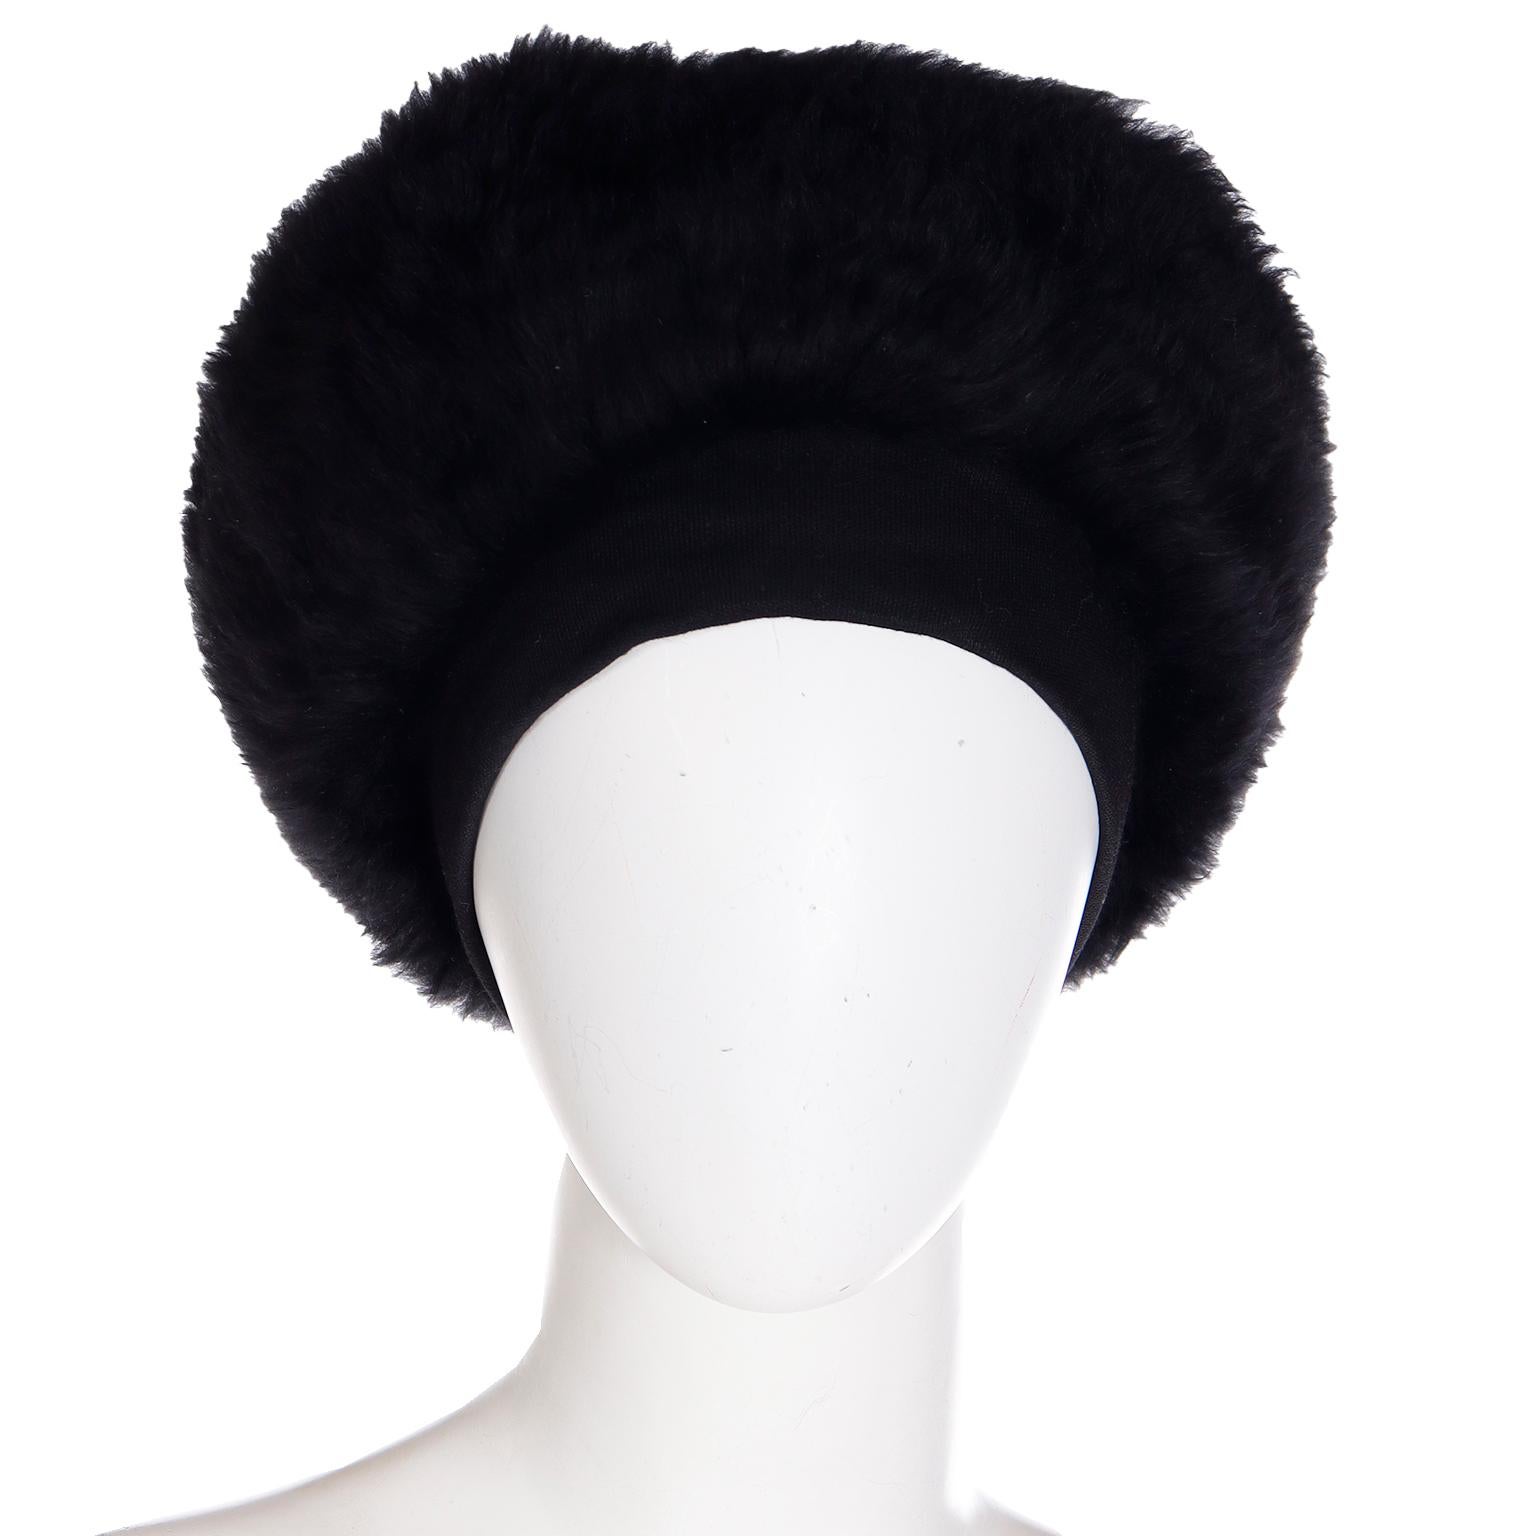 This is a great vintage Yves Saint Laurent 1976/77 hat  will give you instant style this Winter! This black sheared fur hat has a comfortable knit band that secures with a tie at the base of the neck. This fabulous hat was purchased at Lord and